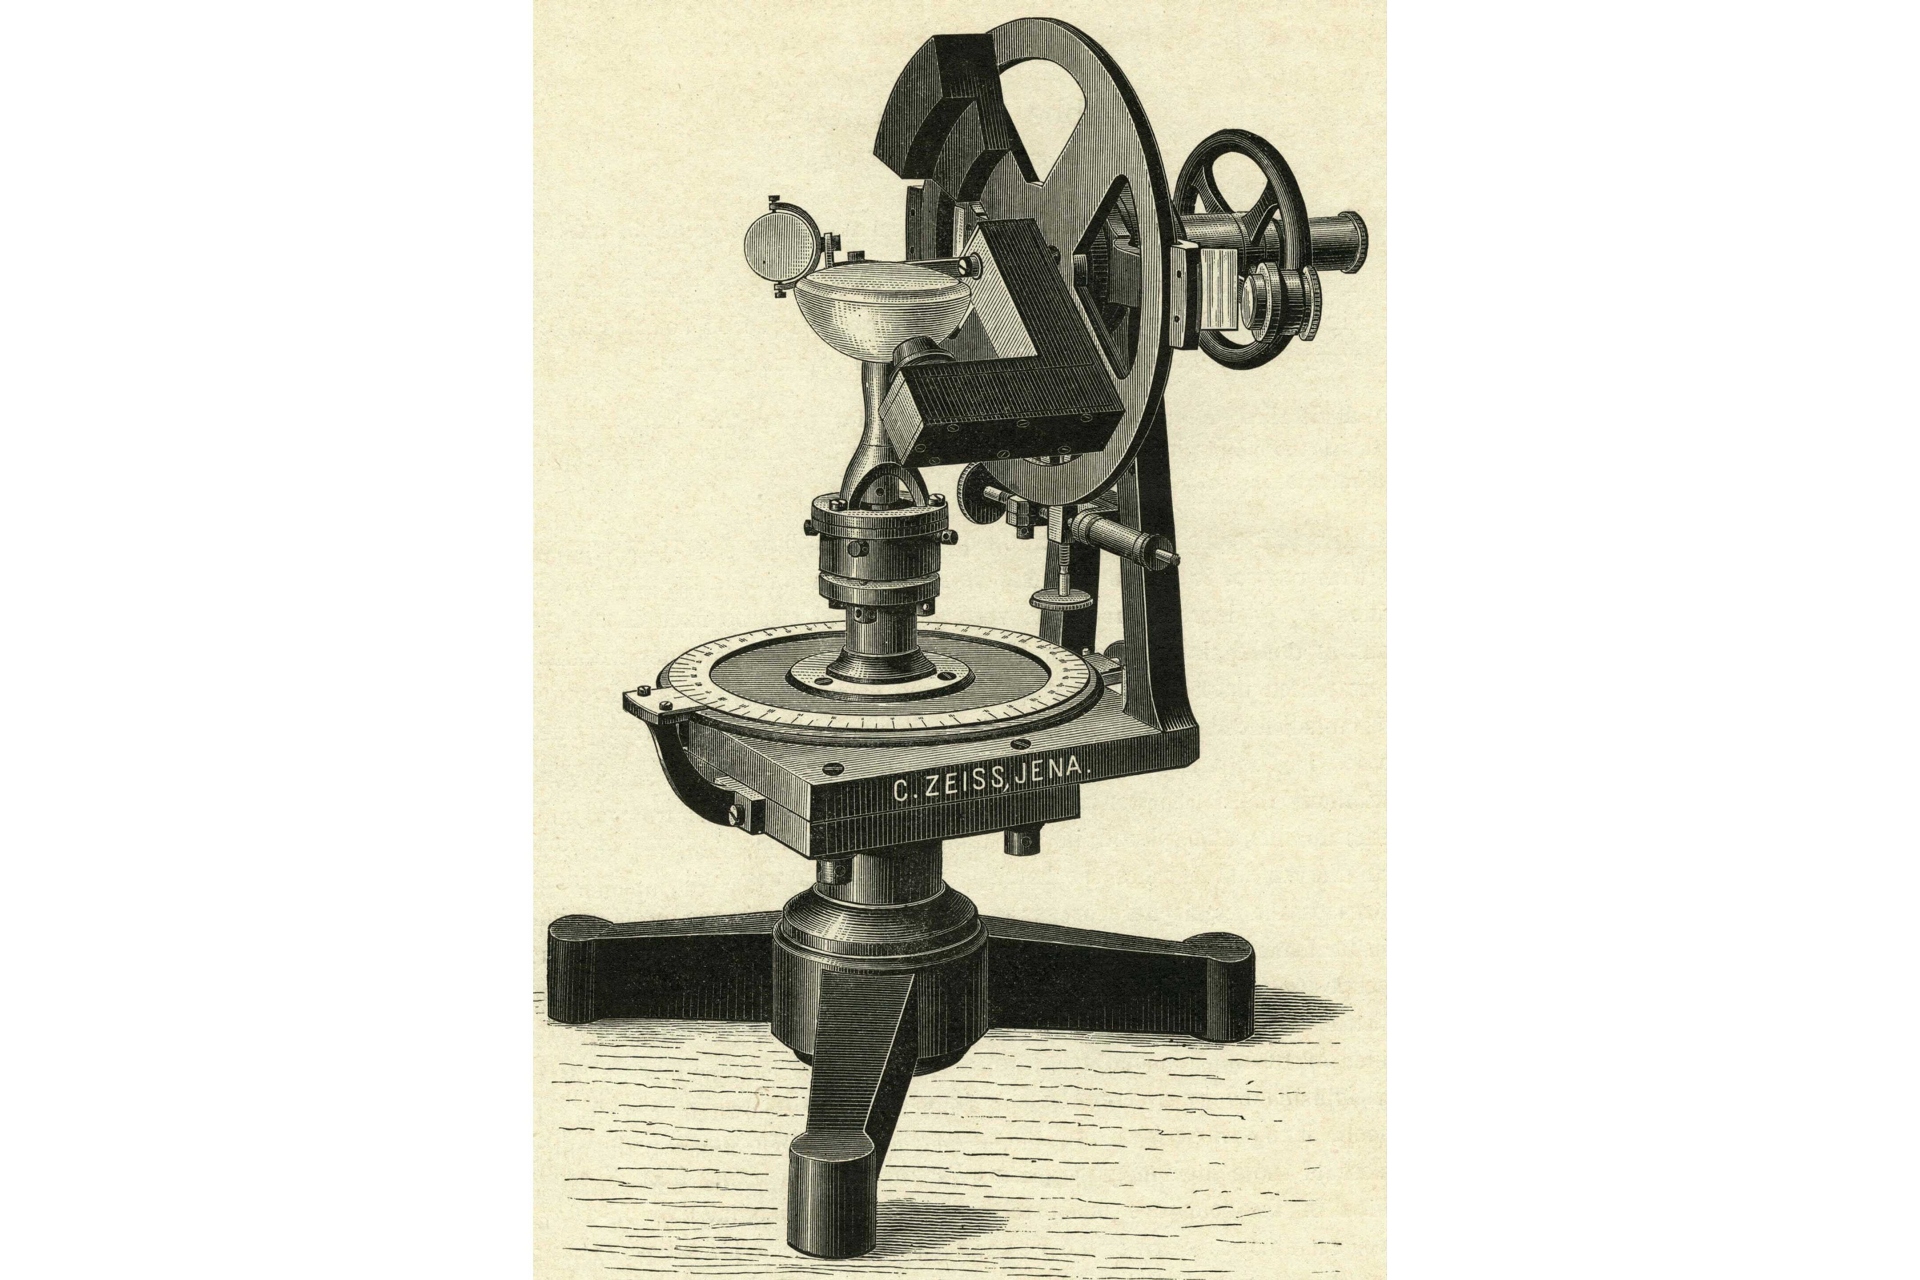 Large crystal refractometer based on Abbe’s design, 1893.